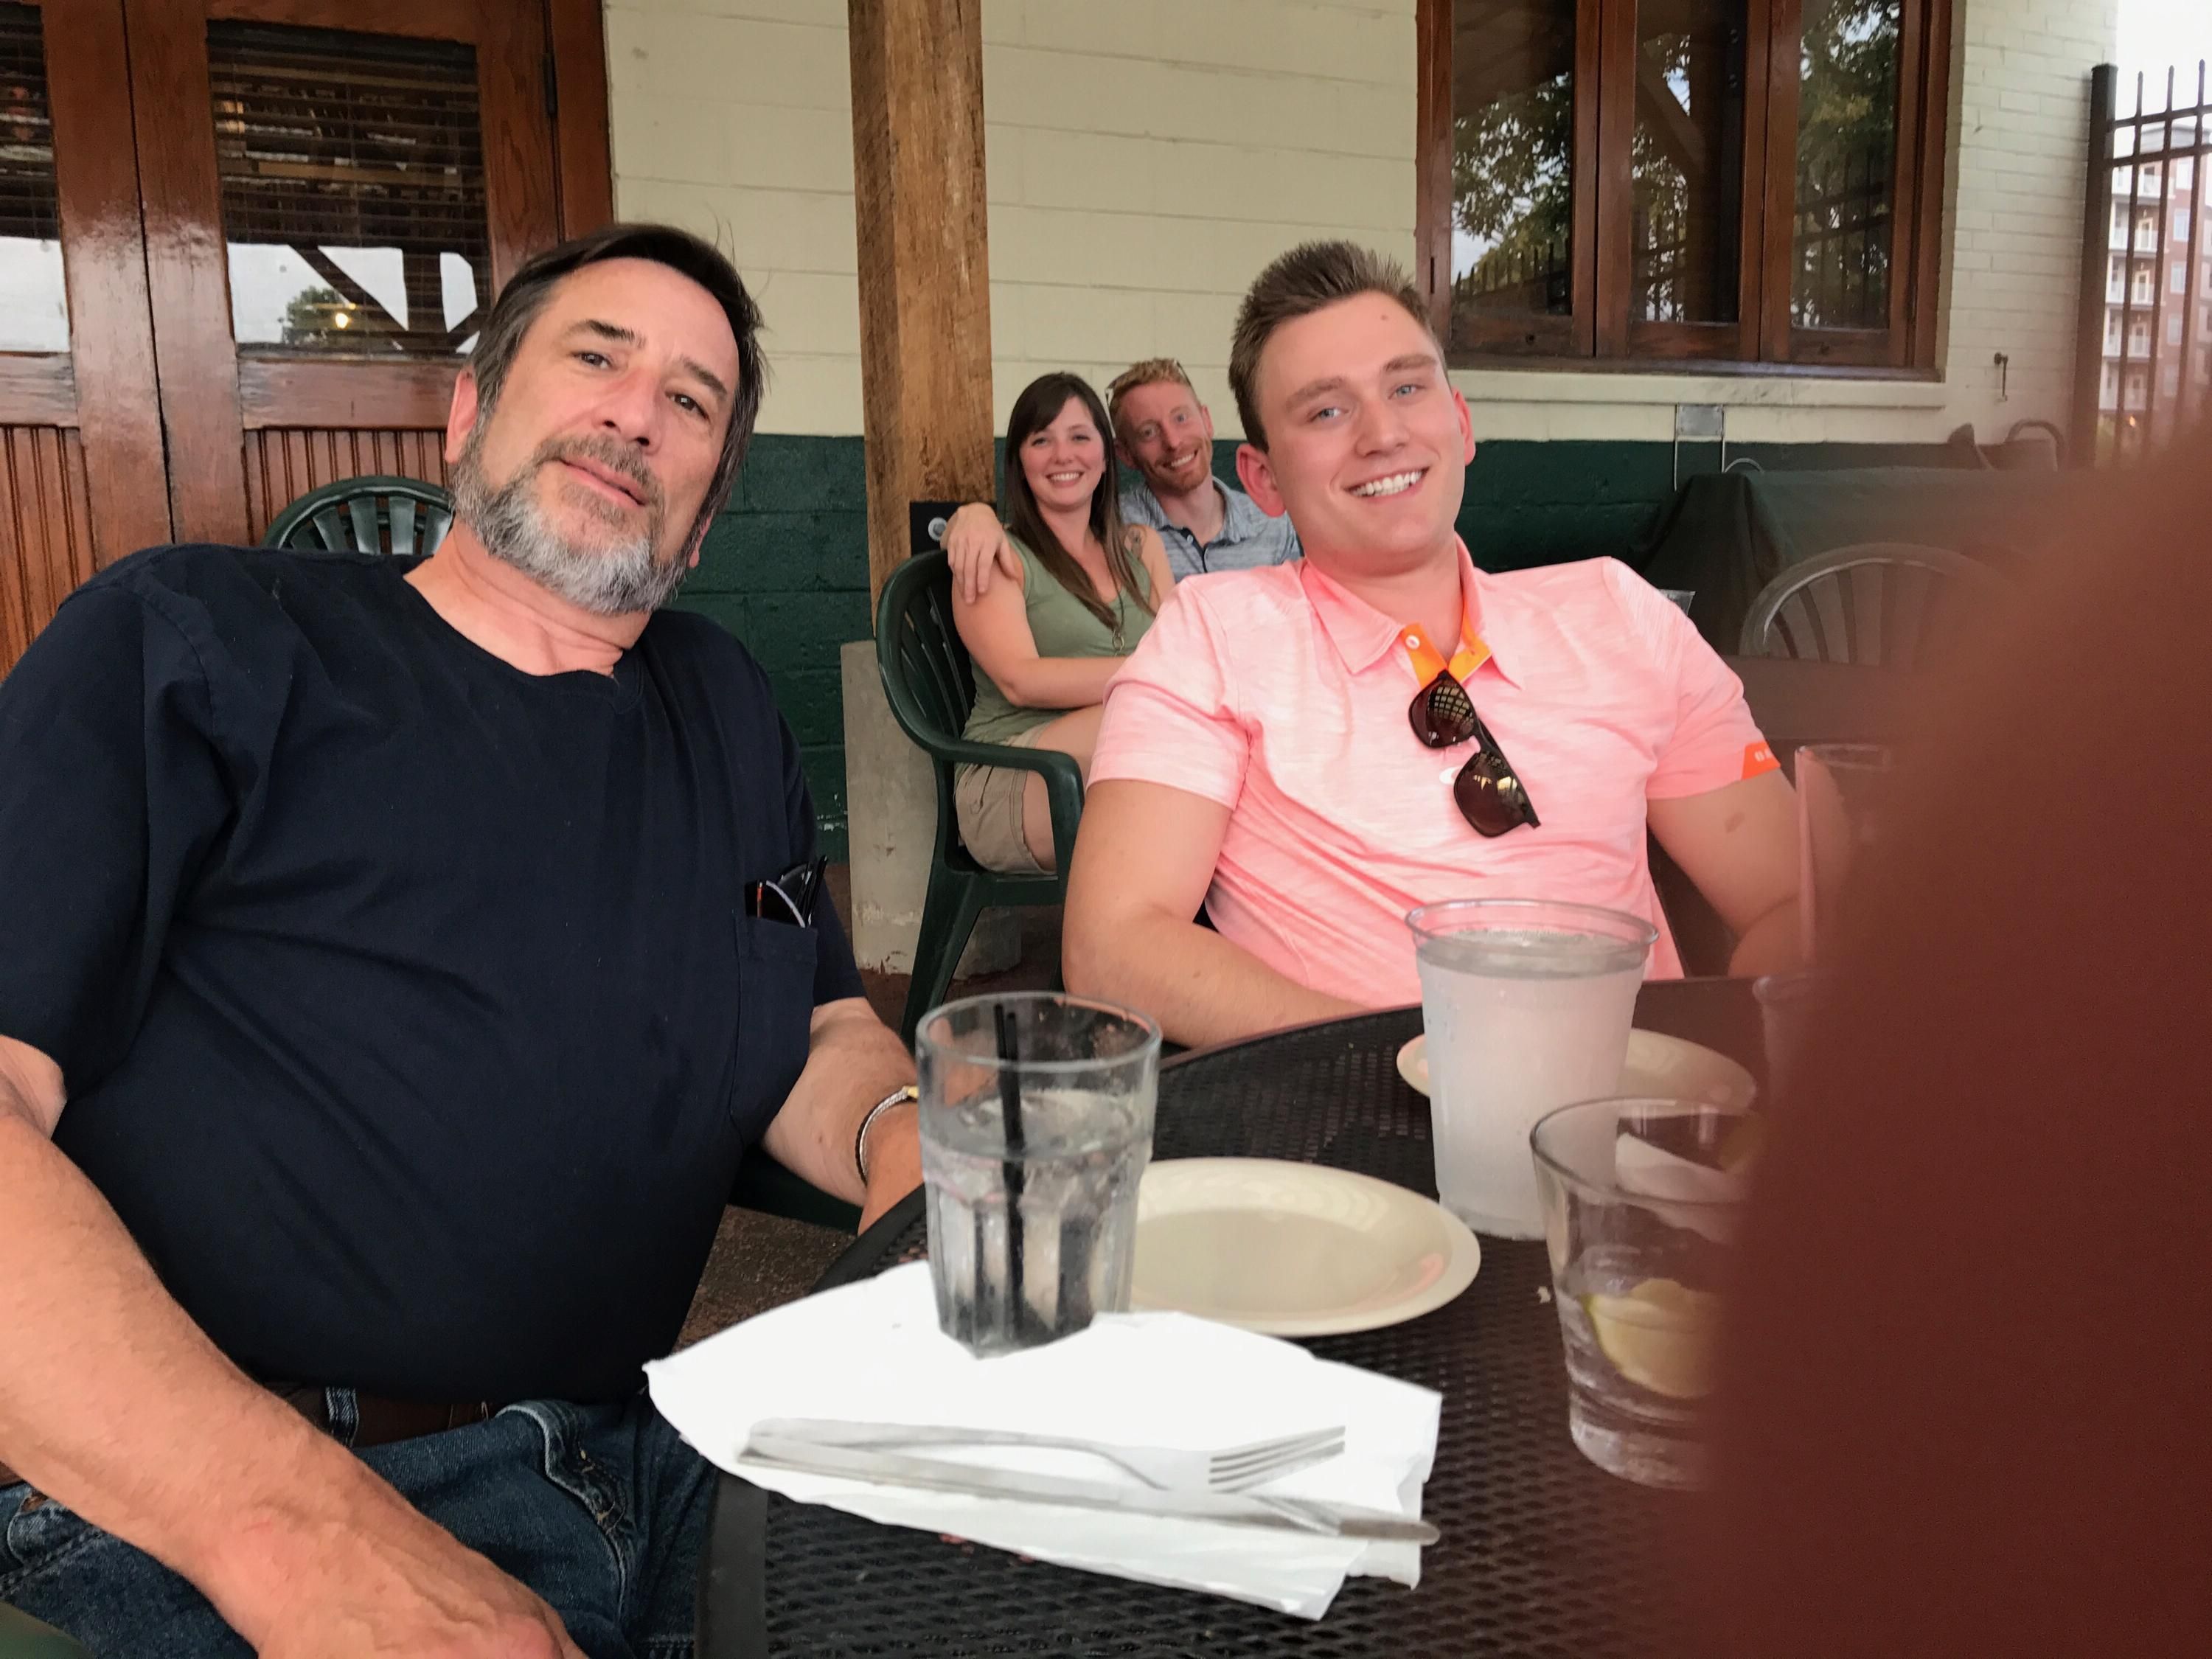 Photobombed by the couple behind my Father and I